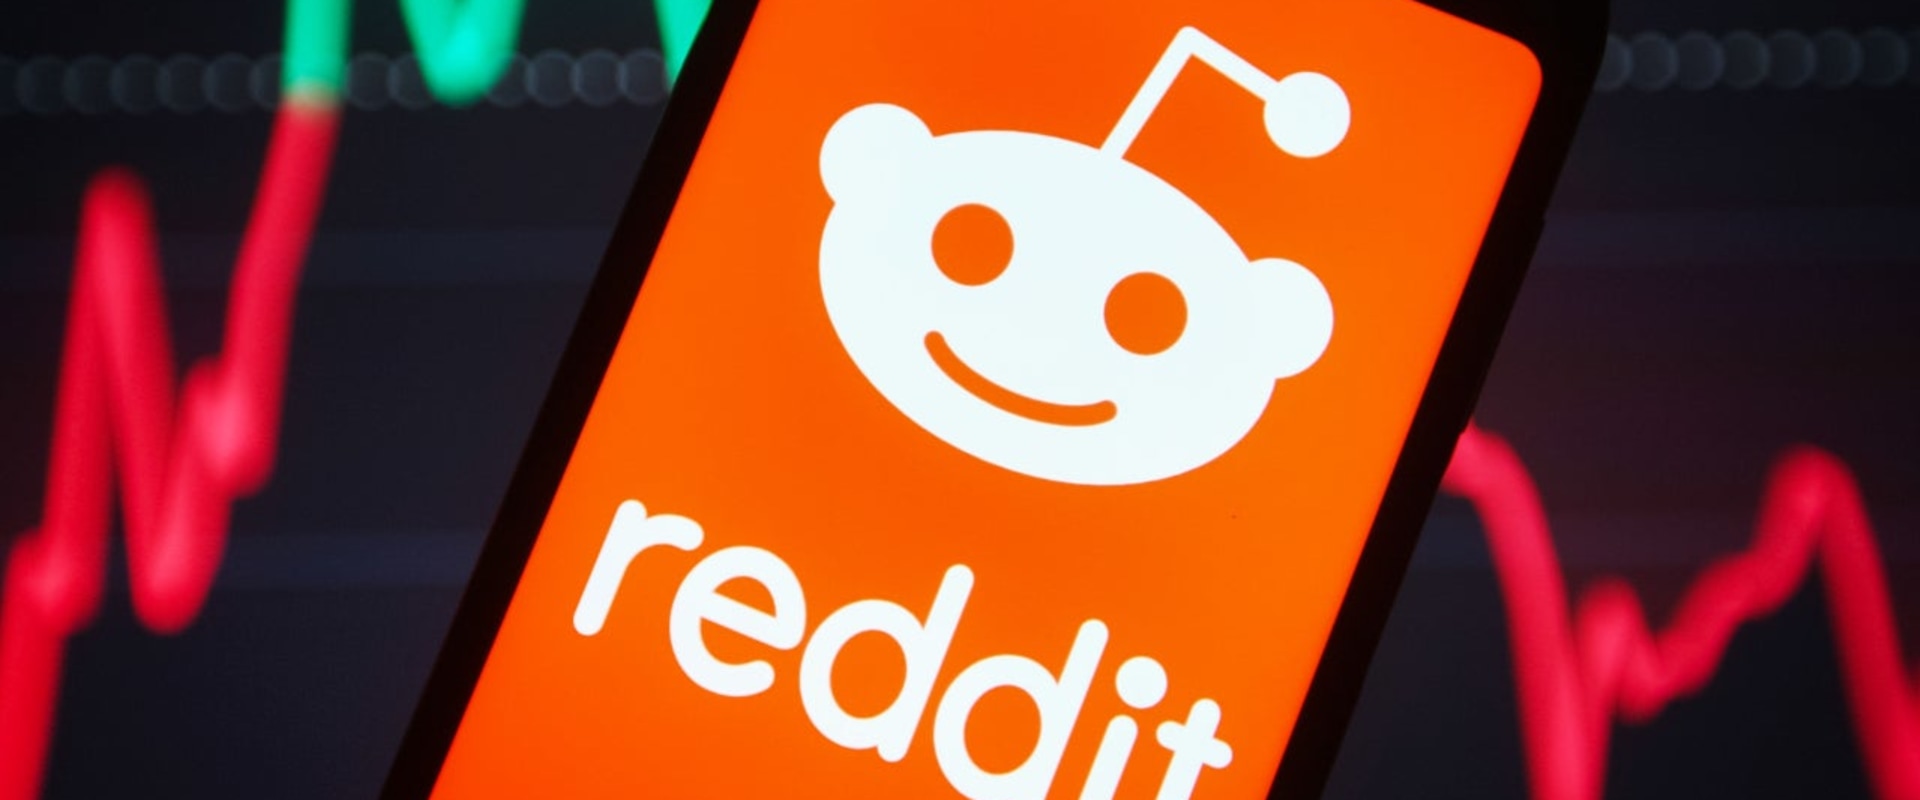 What roth ira should i invest in reddit?